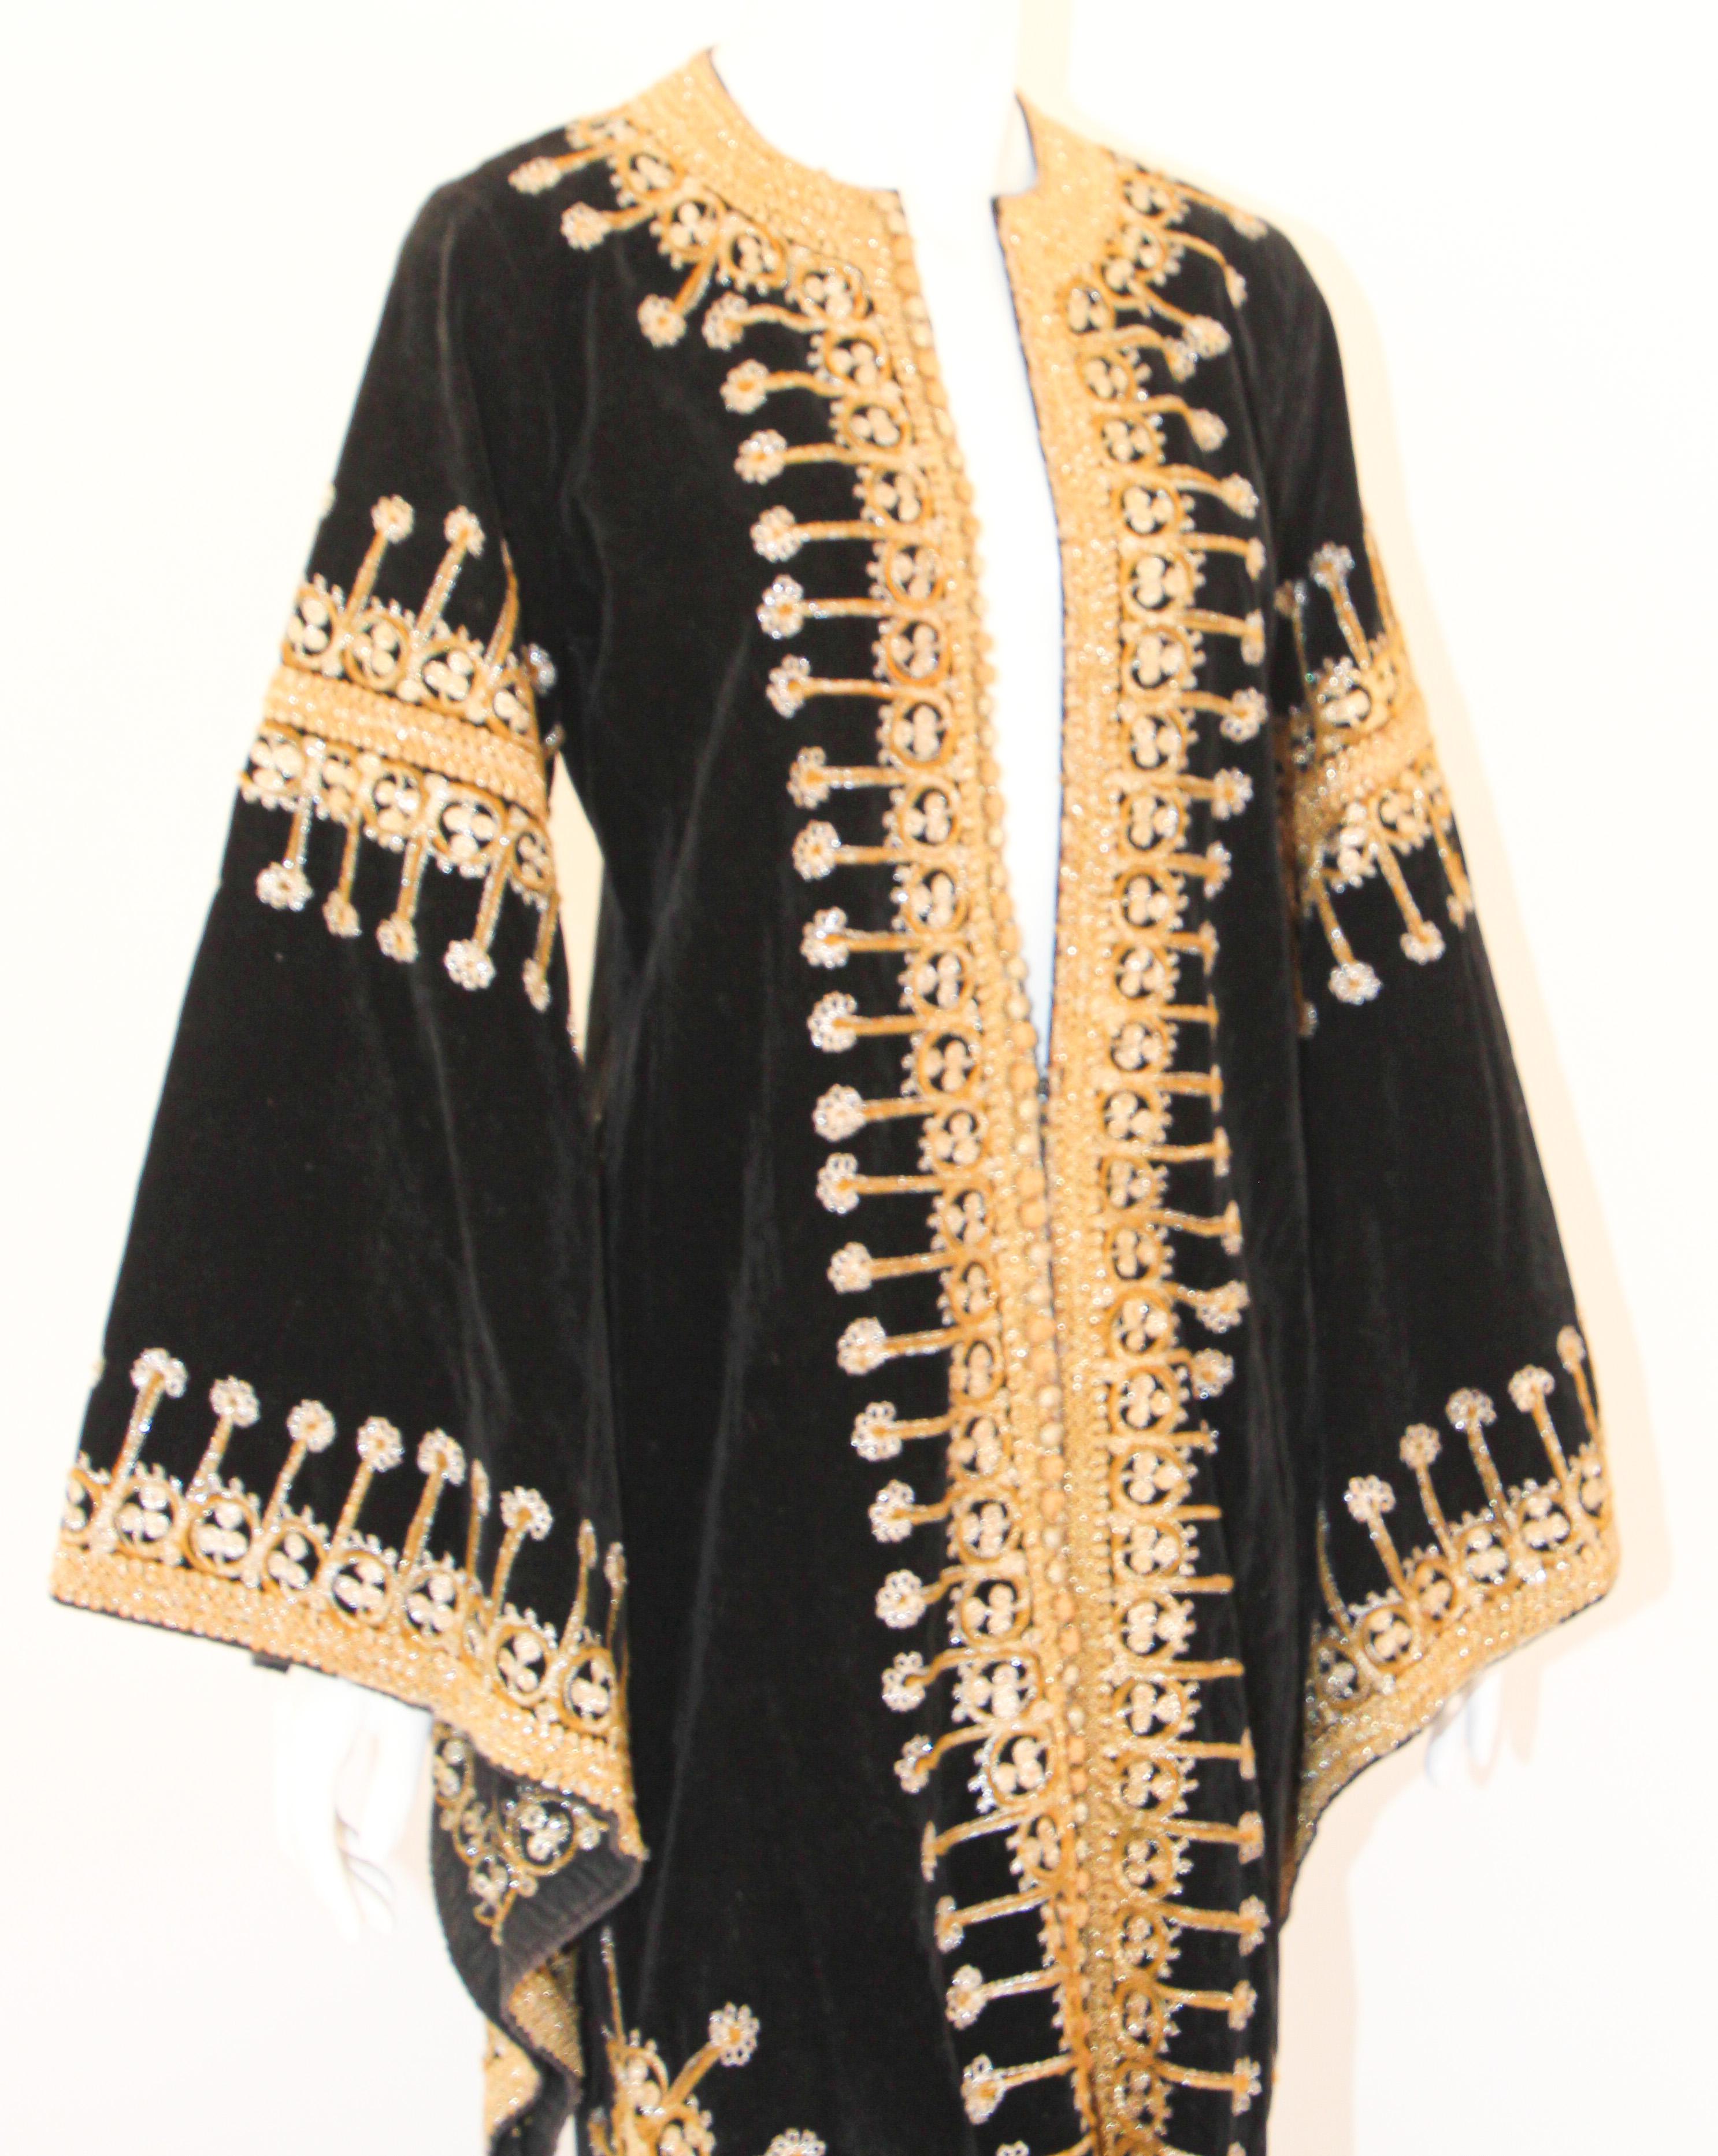 Elegant Moroccan caftan black velvet embroidered with gold metallic threads,
circa 1960s.
This long maxi dress kaftan is embroidered and embellished entirely by hand.
One of a kind evening Moroccan Moorish Middle Eastern gown.
The kaftan features a